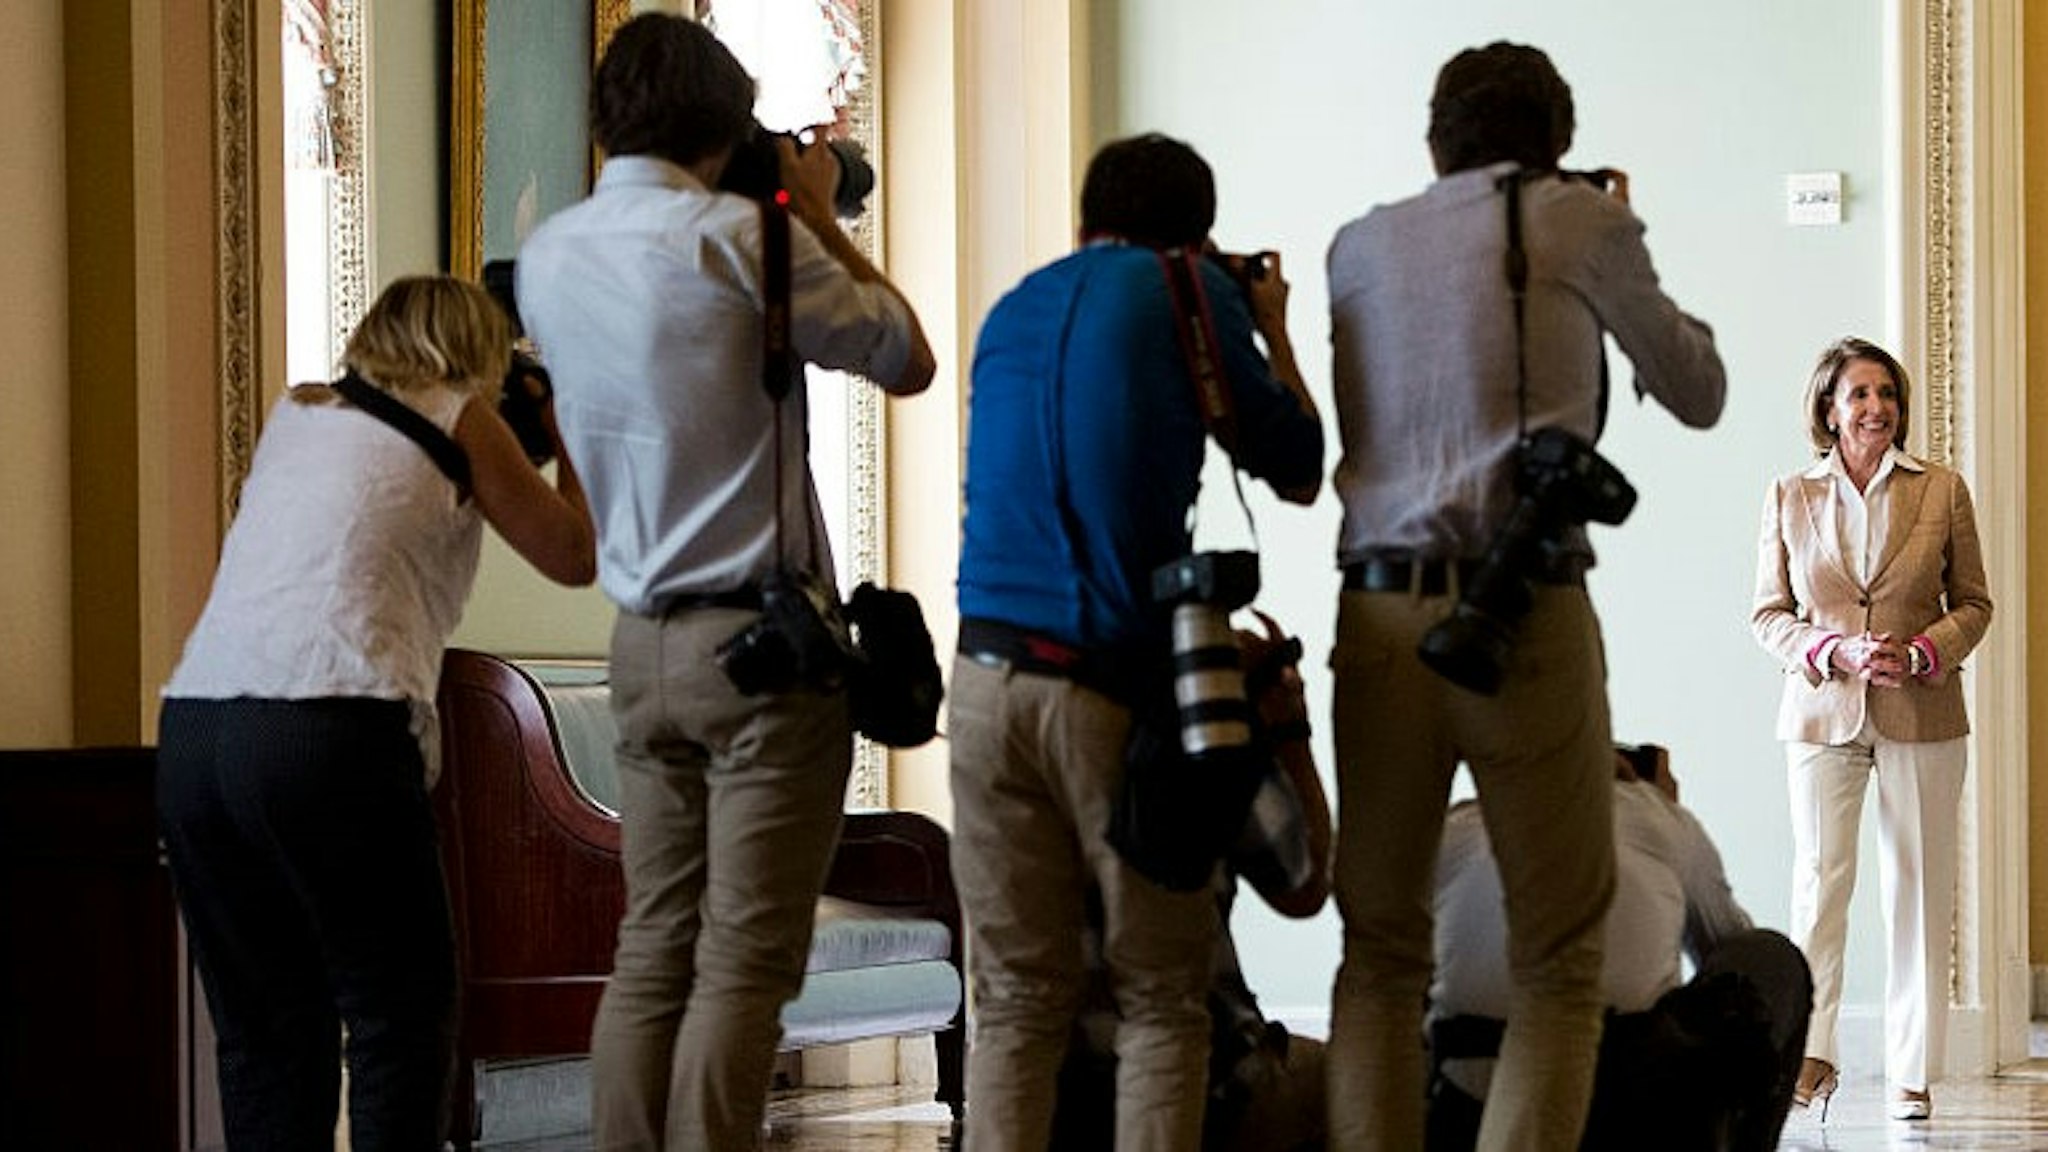 UNITED STATES - JUNE 25: News photographers gather in the Ohio Clock Corridor to photograph House Minority Leader Nancy Pelosi, D-Calif., and Senate Minority Leader Harry Reid, D-Nev., as they walk to their news conference in the Capitol on Thursday, June 25, 2015. (Photo By